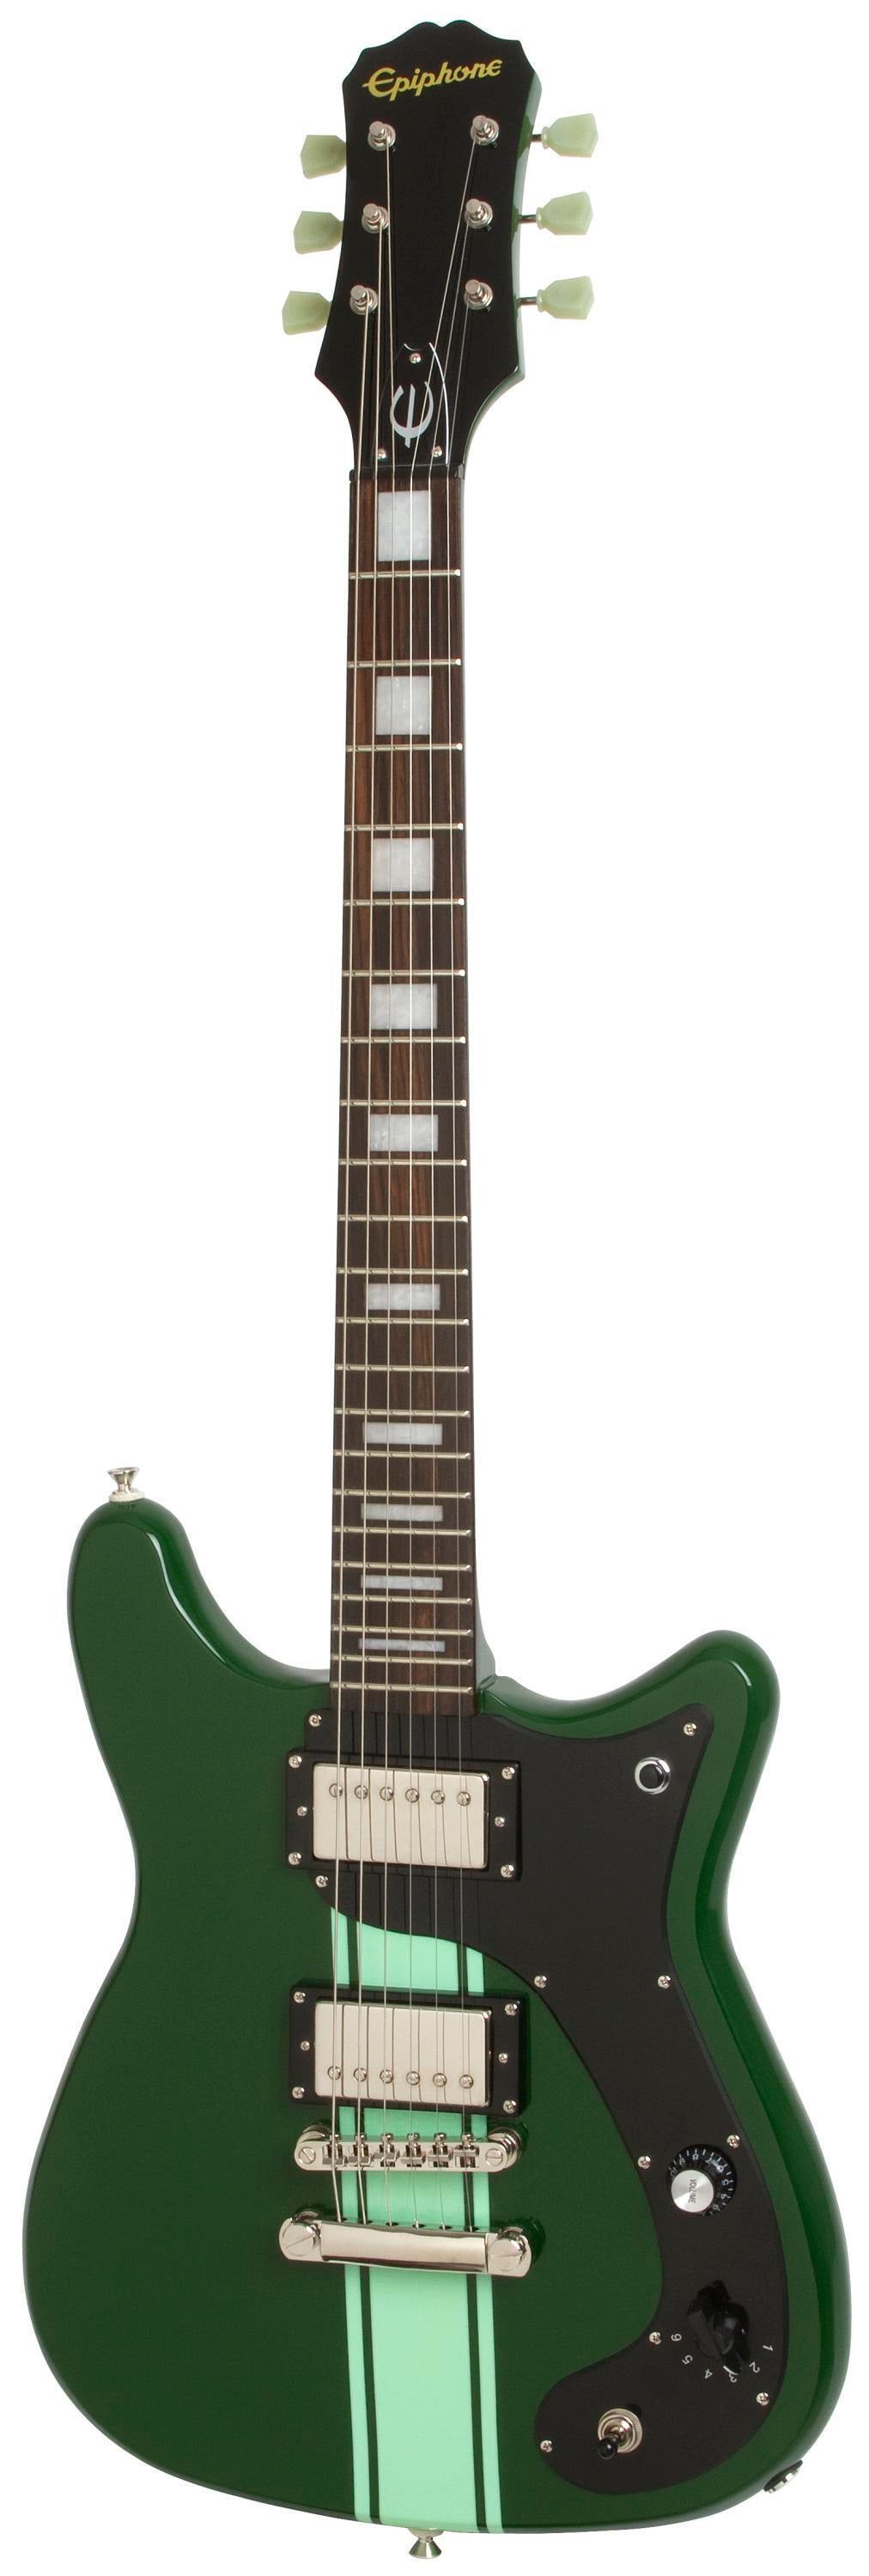 Epiphone Limited Edition Wilshire Phant-o-matic - Limited Edition Emerald  Green